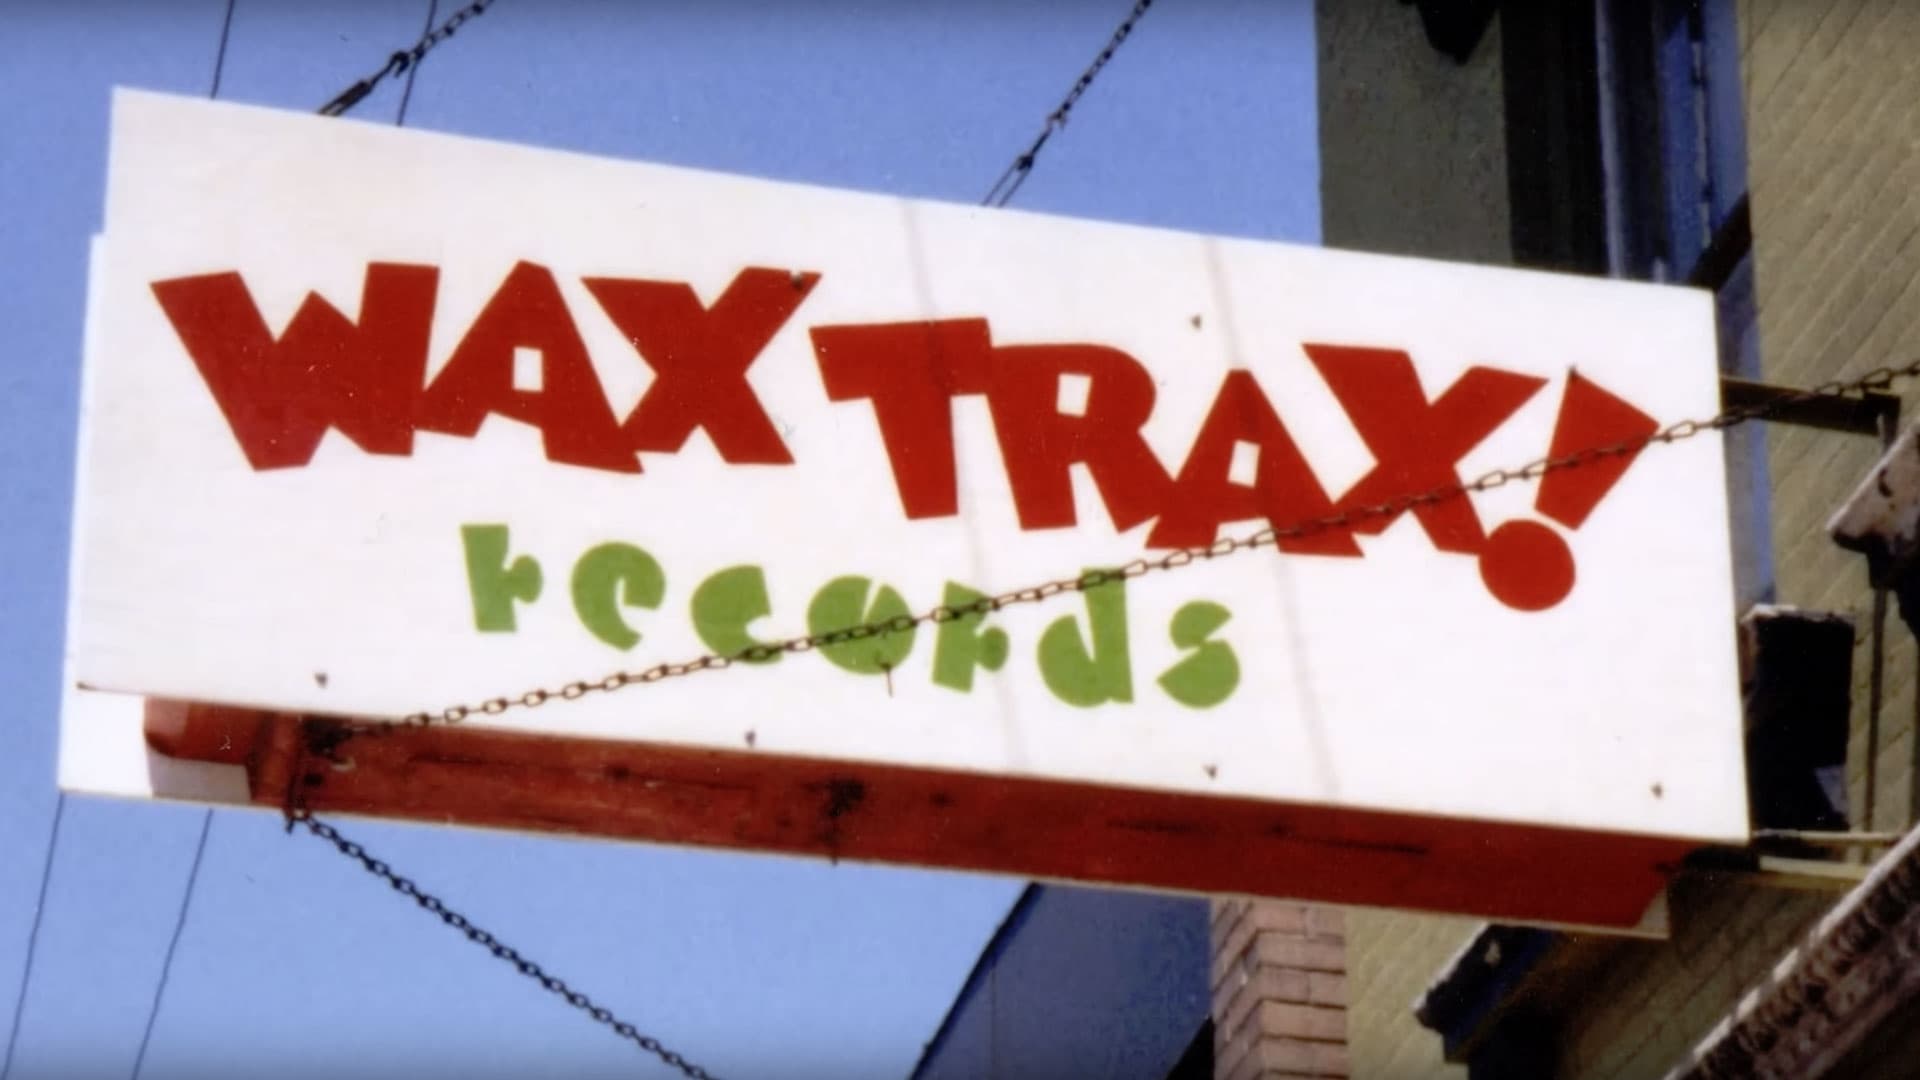 Industrial Accident: The Story of Wax Trax! Records 2017 123movies